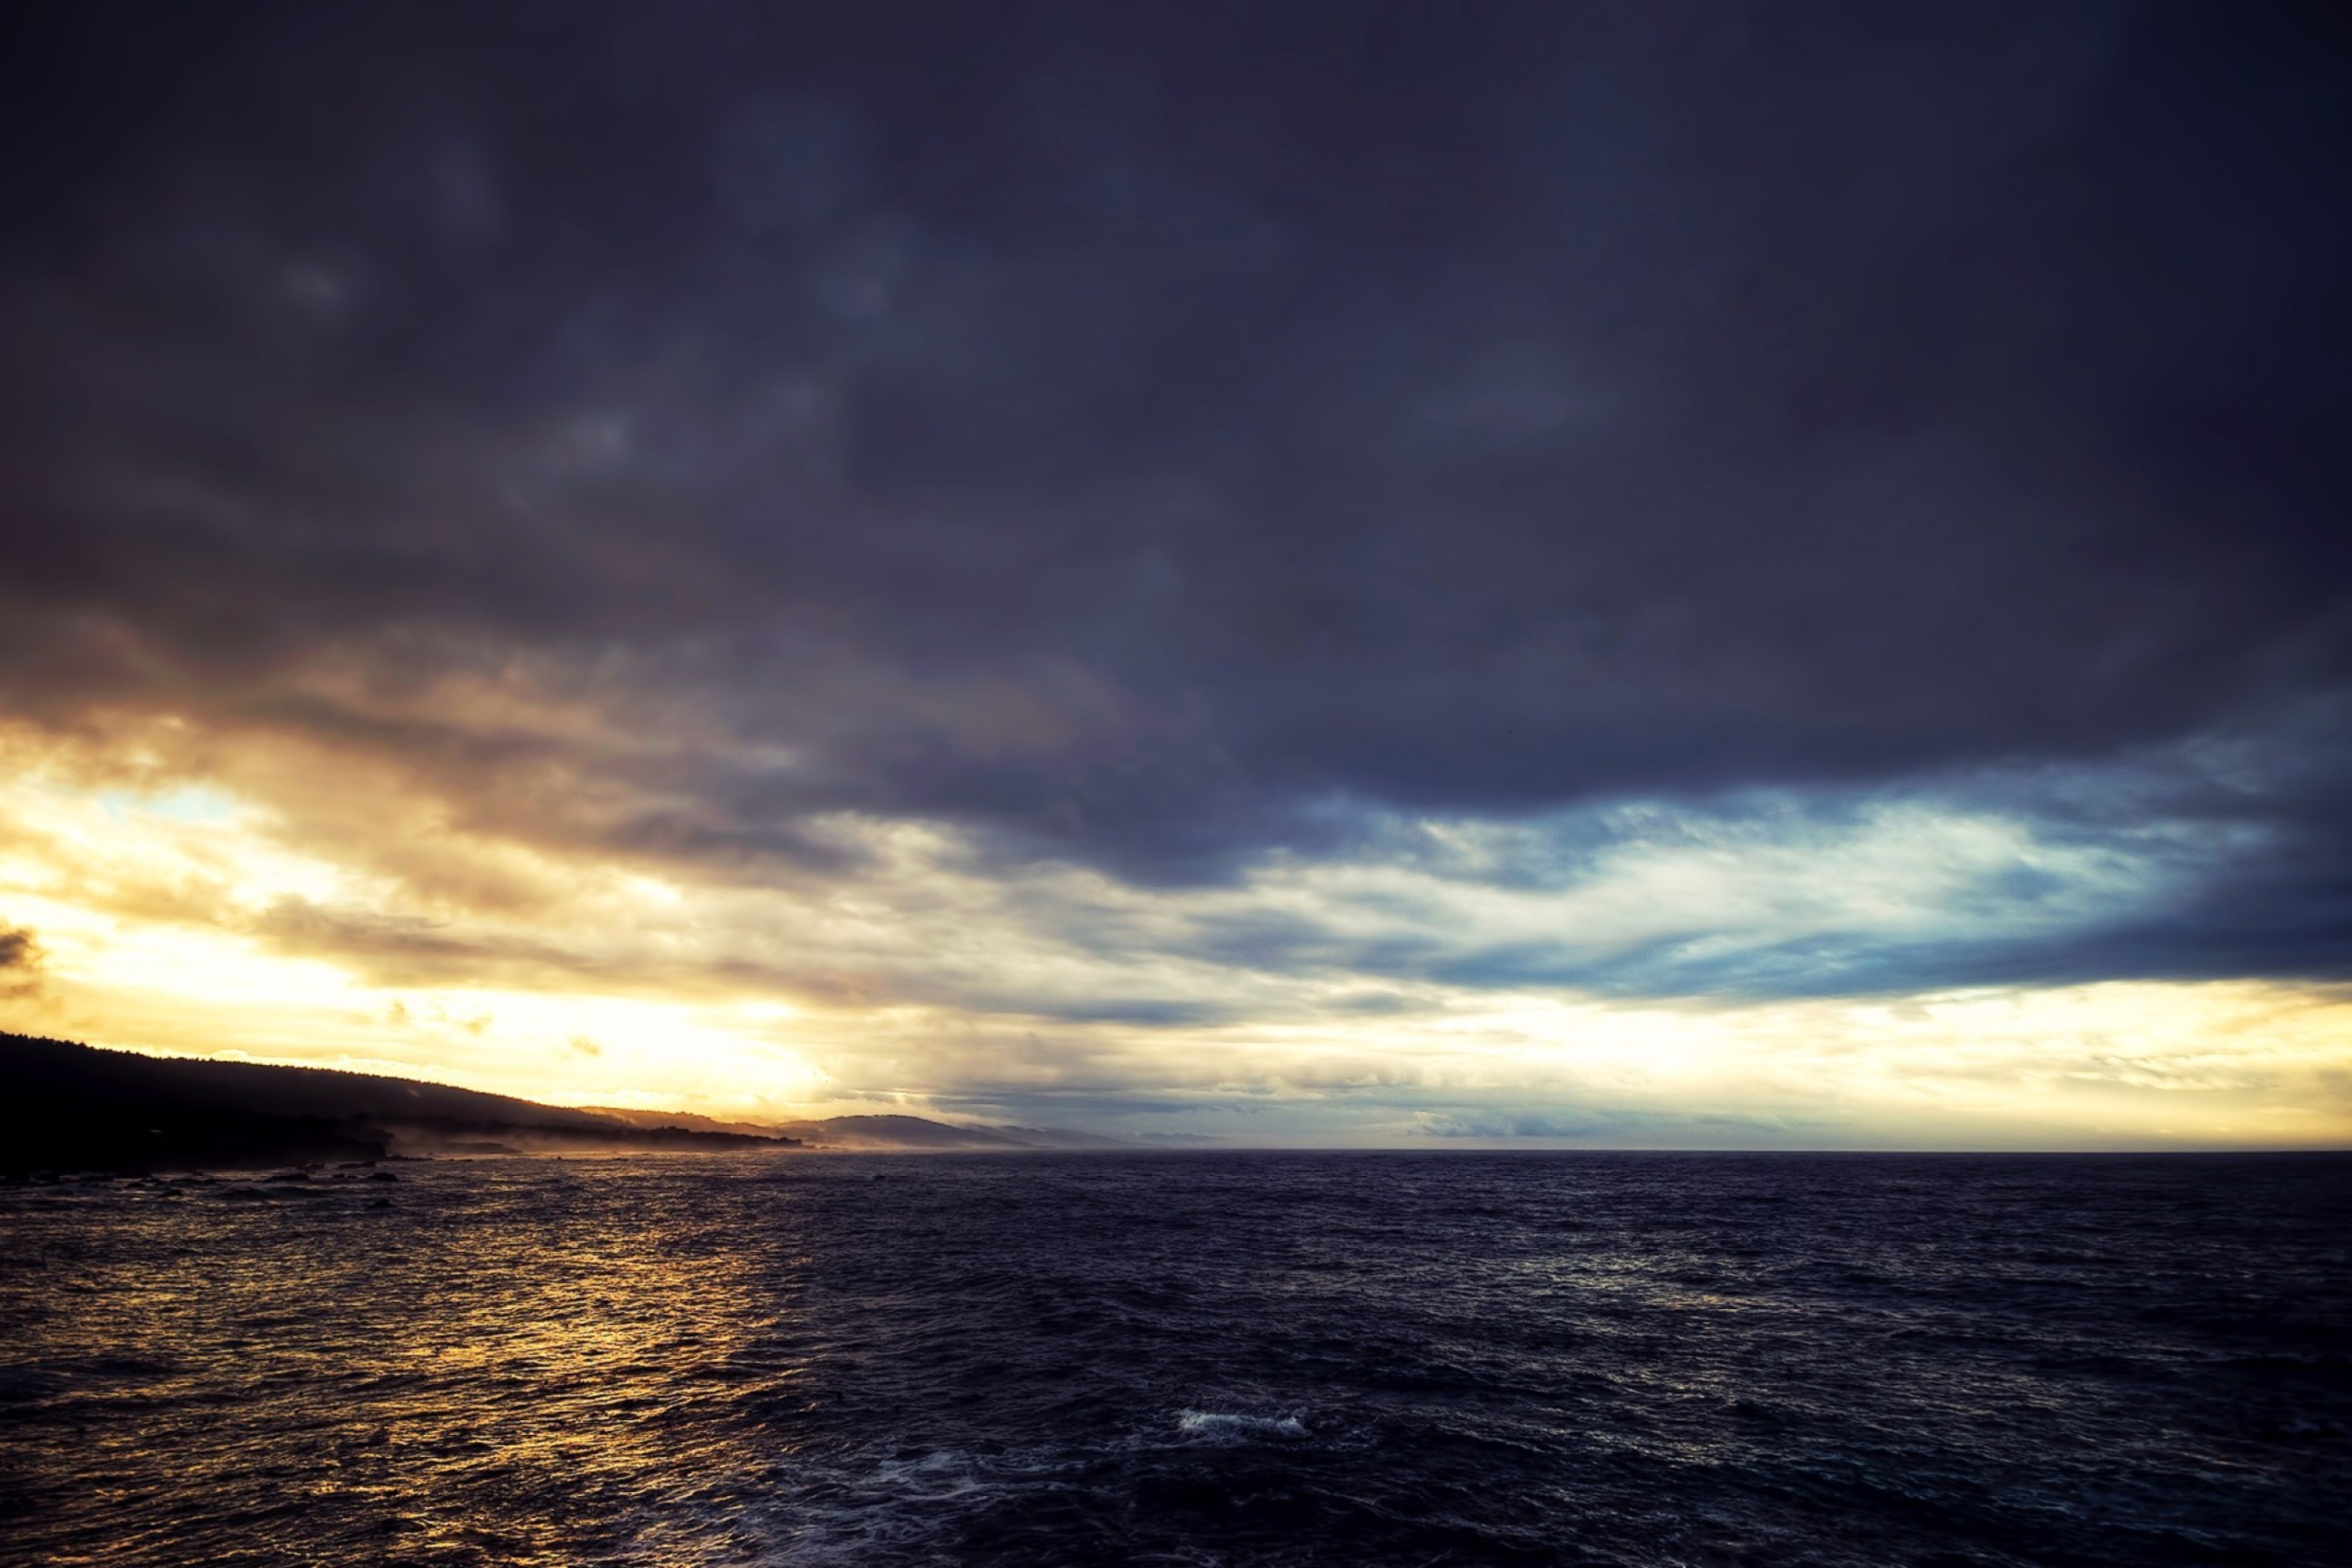 Cloudy Sunset And Black Sea wallpaper 2880x1920